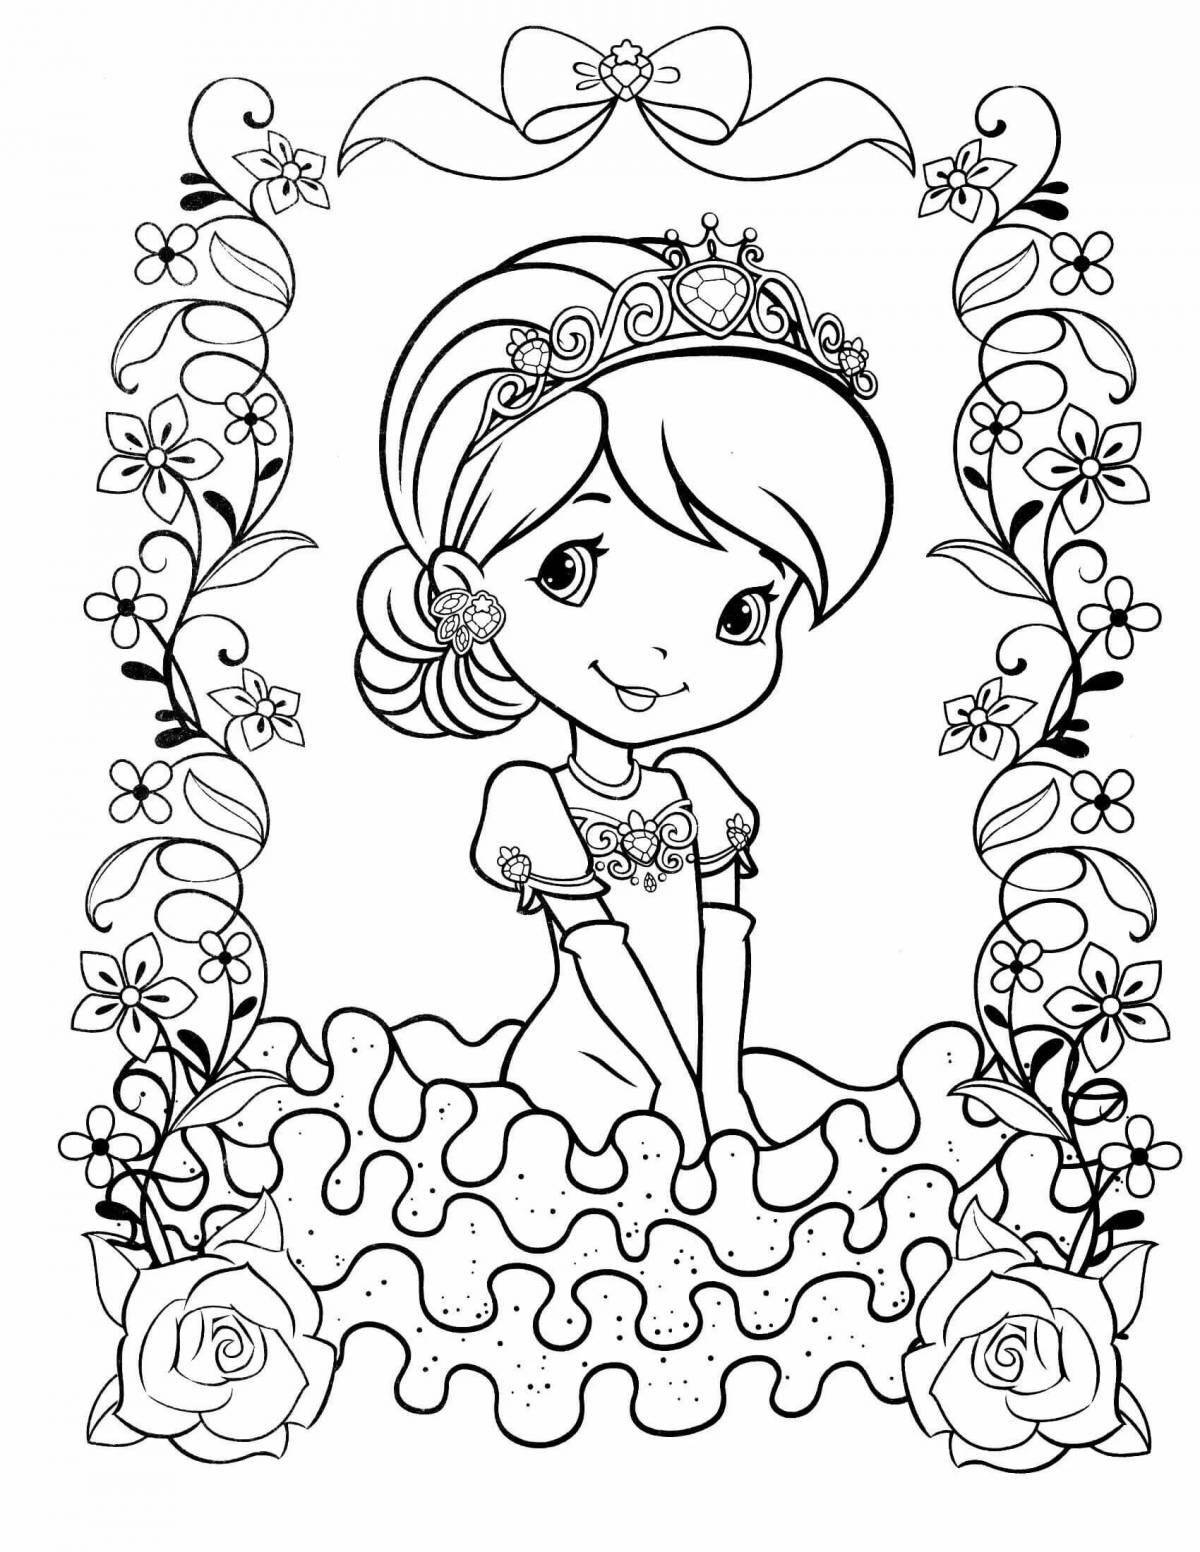 Gorgeous princess coloring pages for girls 6 years old